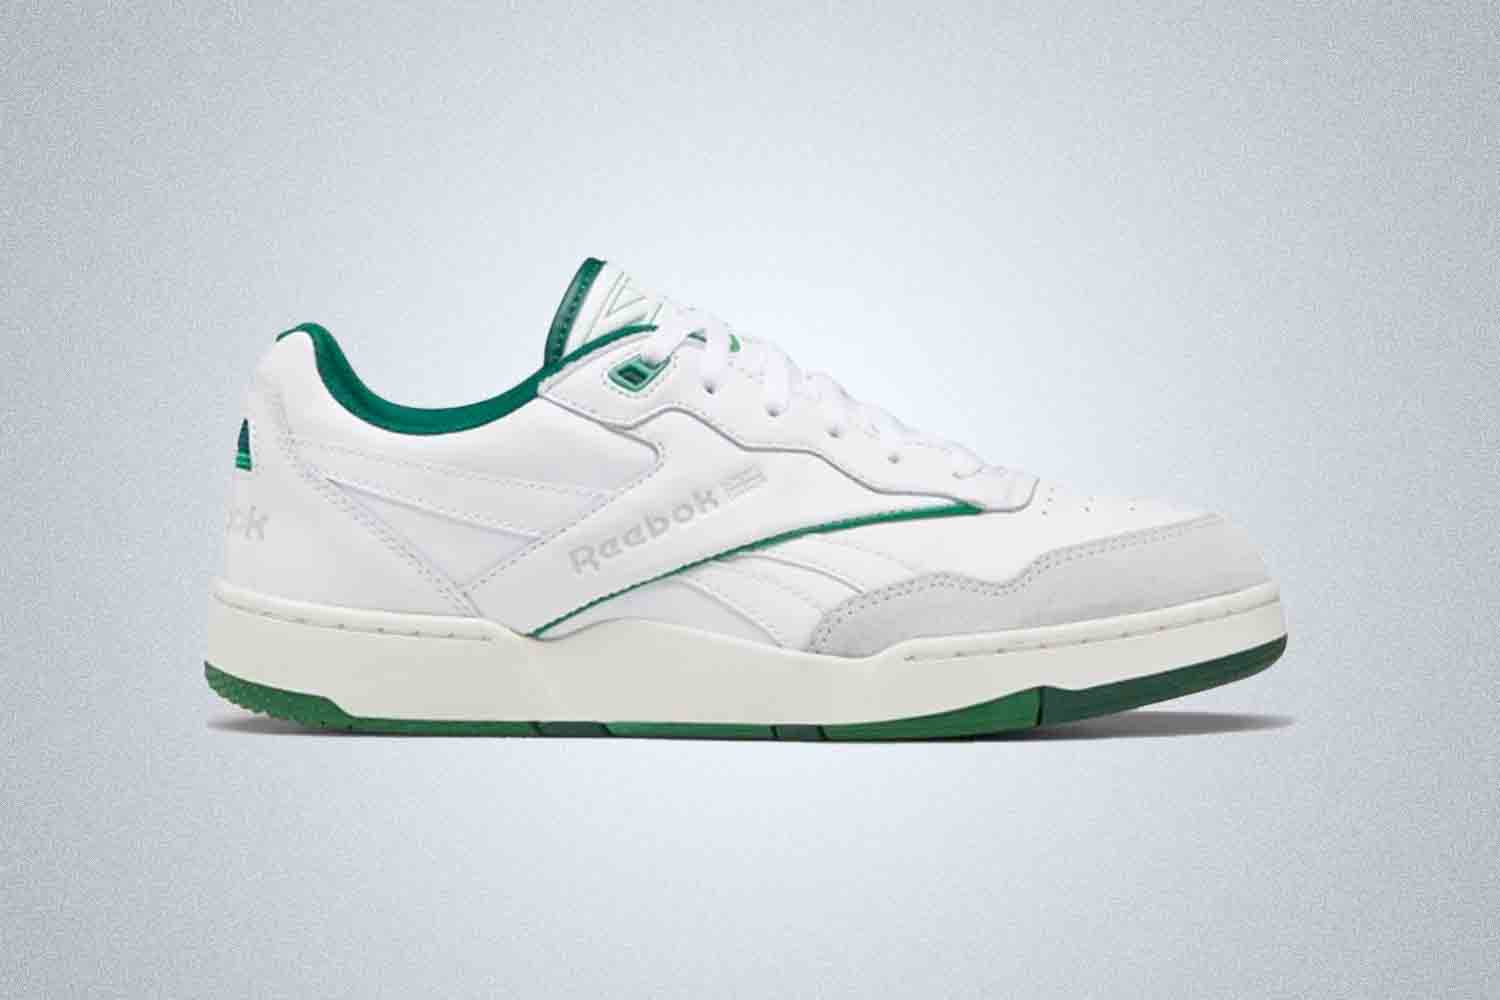 a green and white Reebok basketball sneaker on a grey background